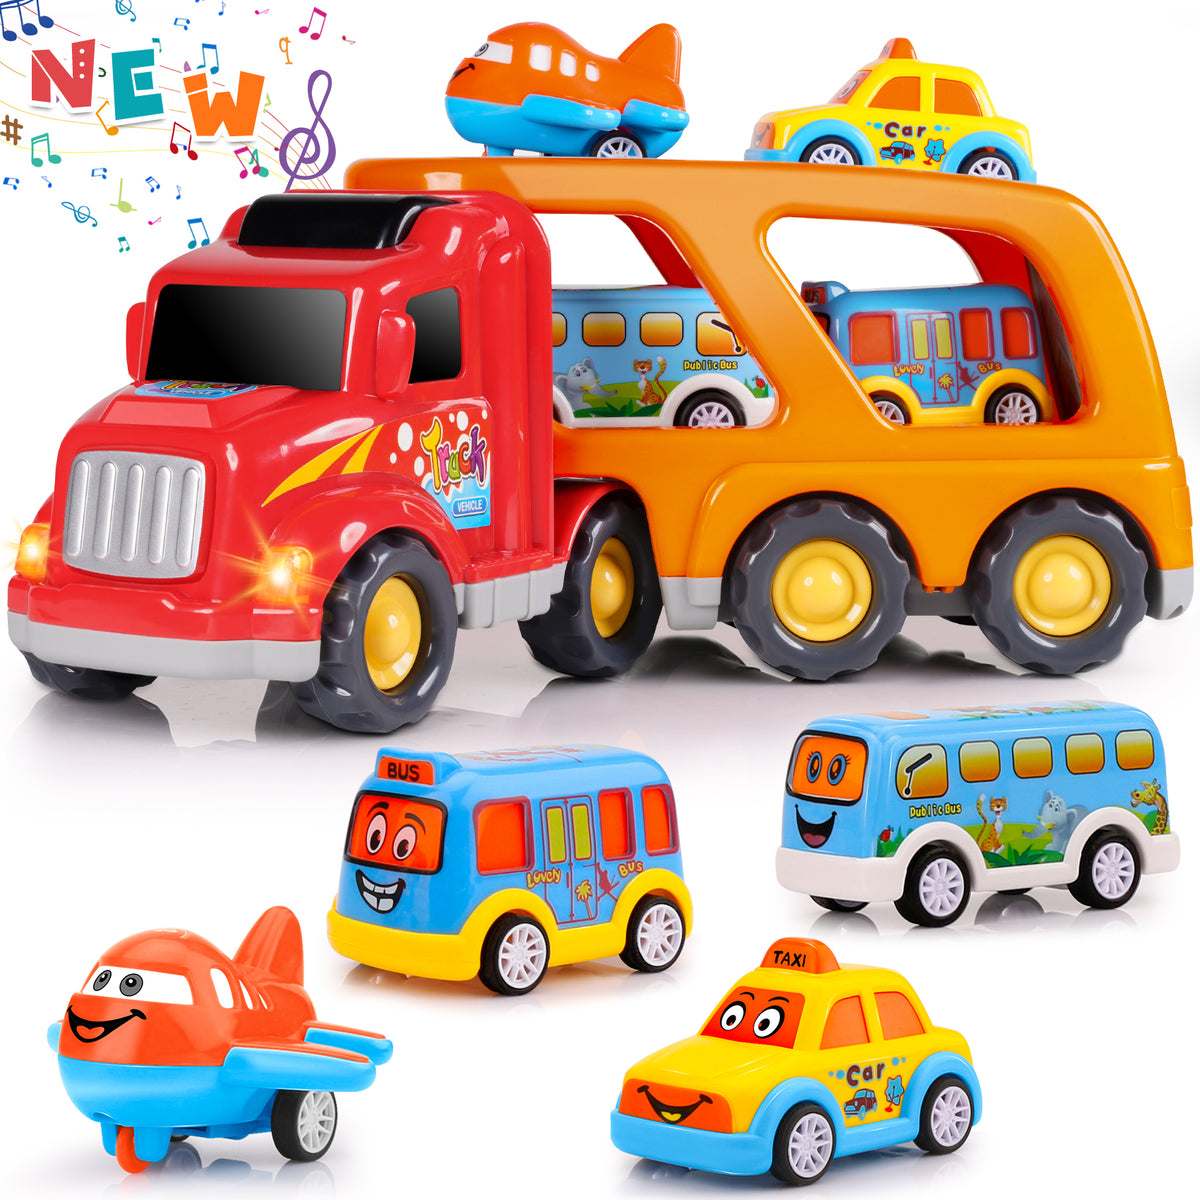 Nicmore 5-In-1 Carrier Truck Transport Cars